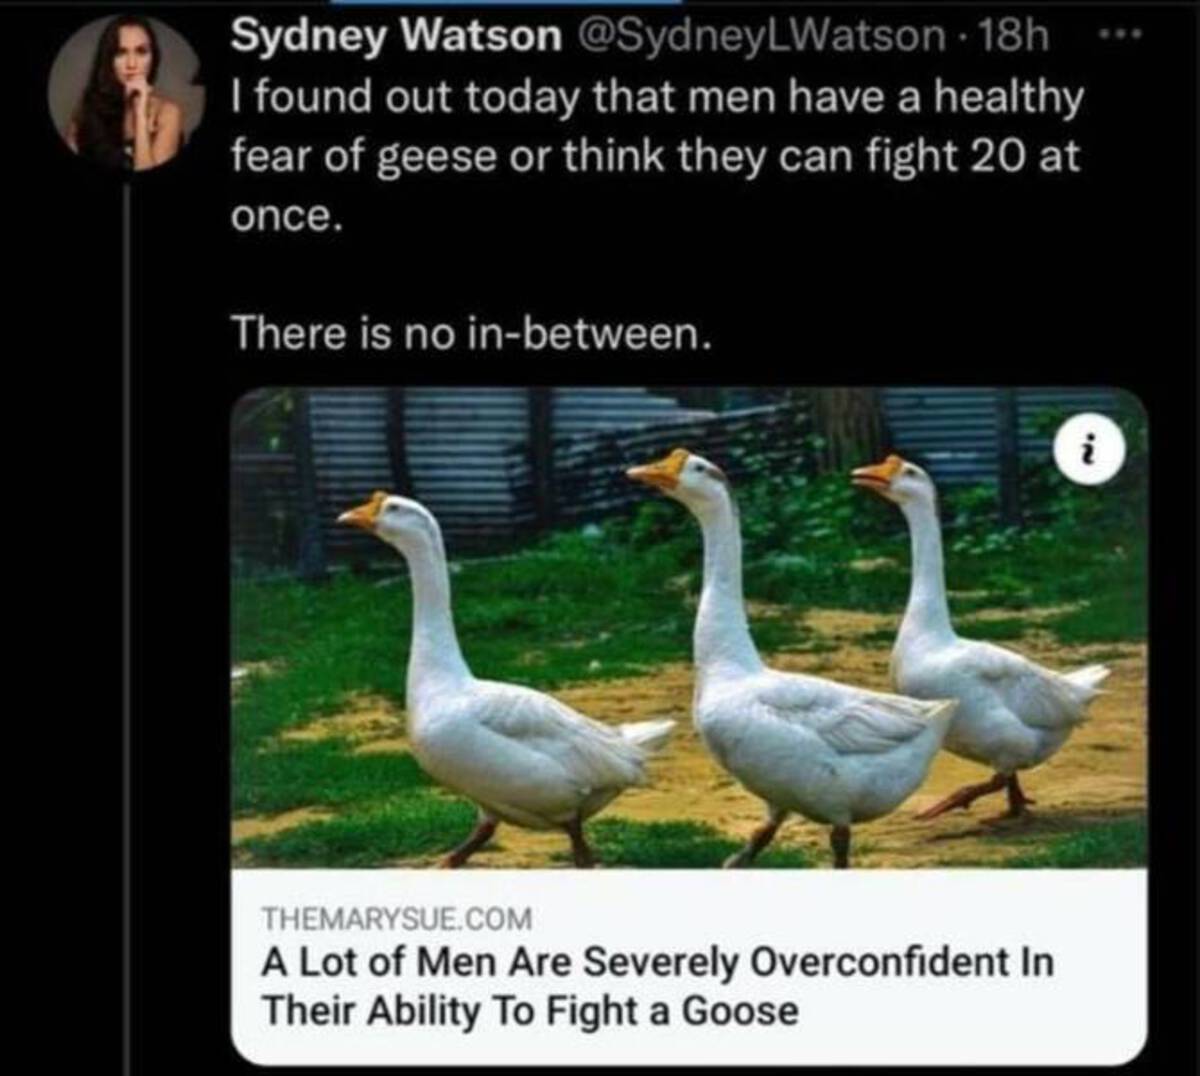 can a human beat a goose - Sydney Watson 18h I found out today that men have a healthy fear of geese or think they can fight 20 at once. There is no inbetween. 2 Themarysue.Com A Lot of Men Are Severely Overconfident In Their Ability To Fight a Goose